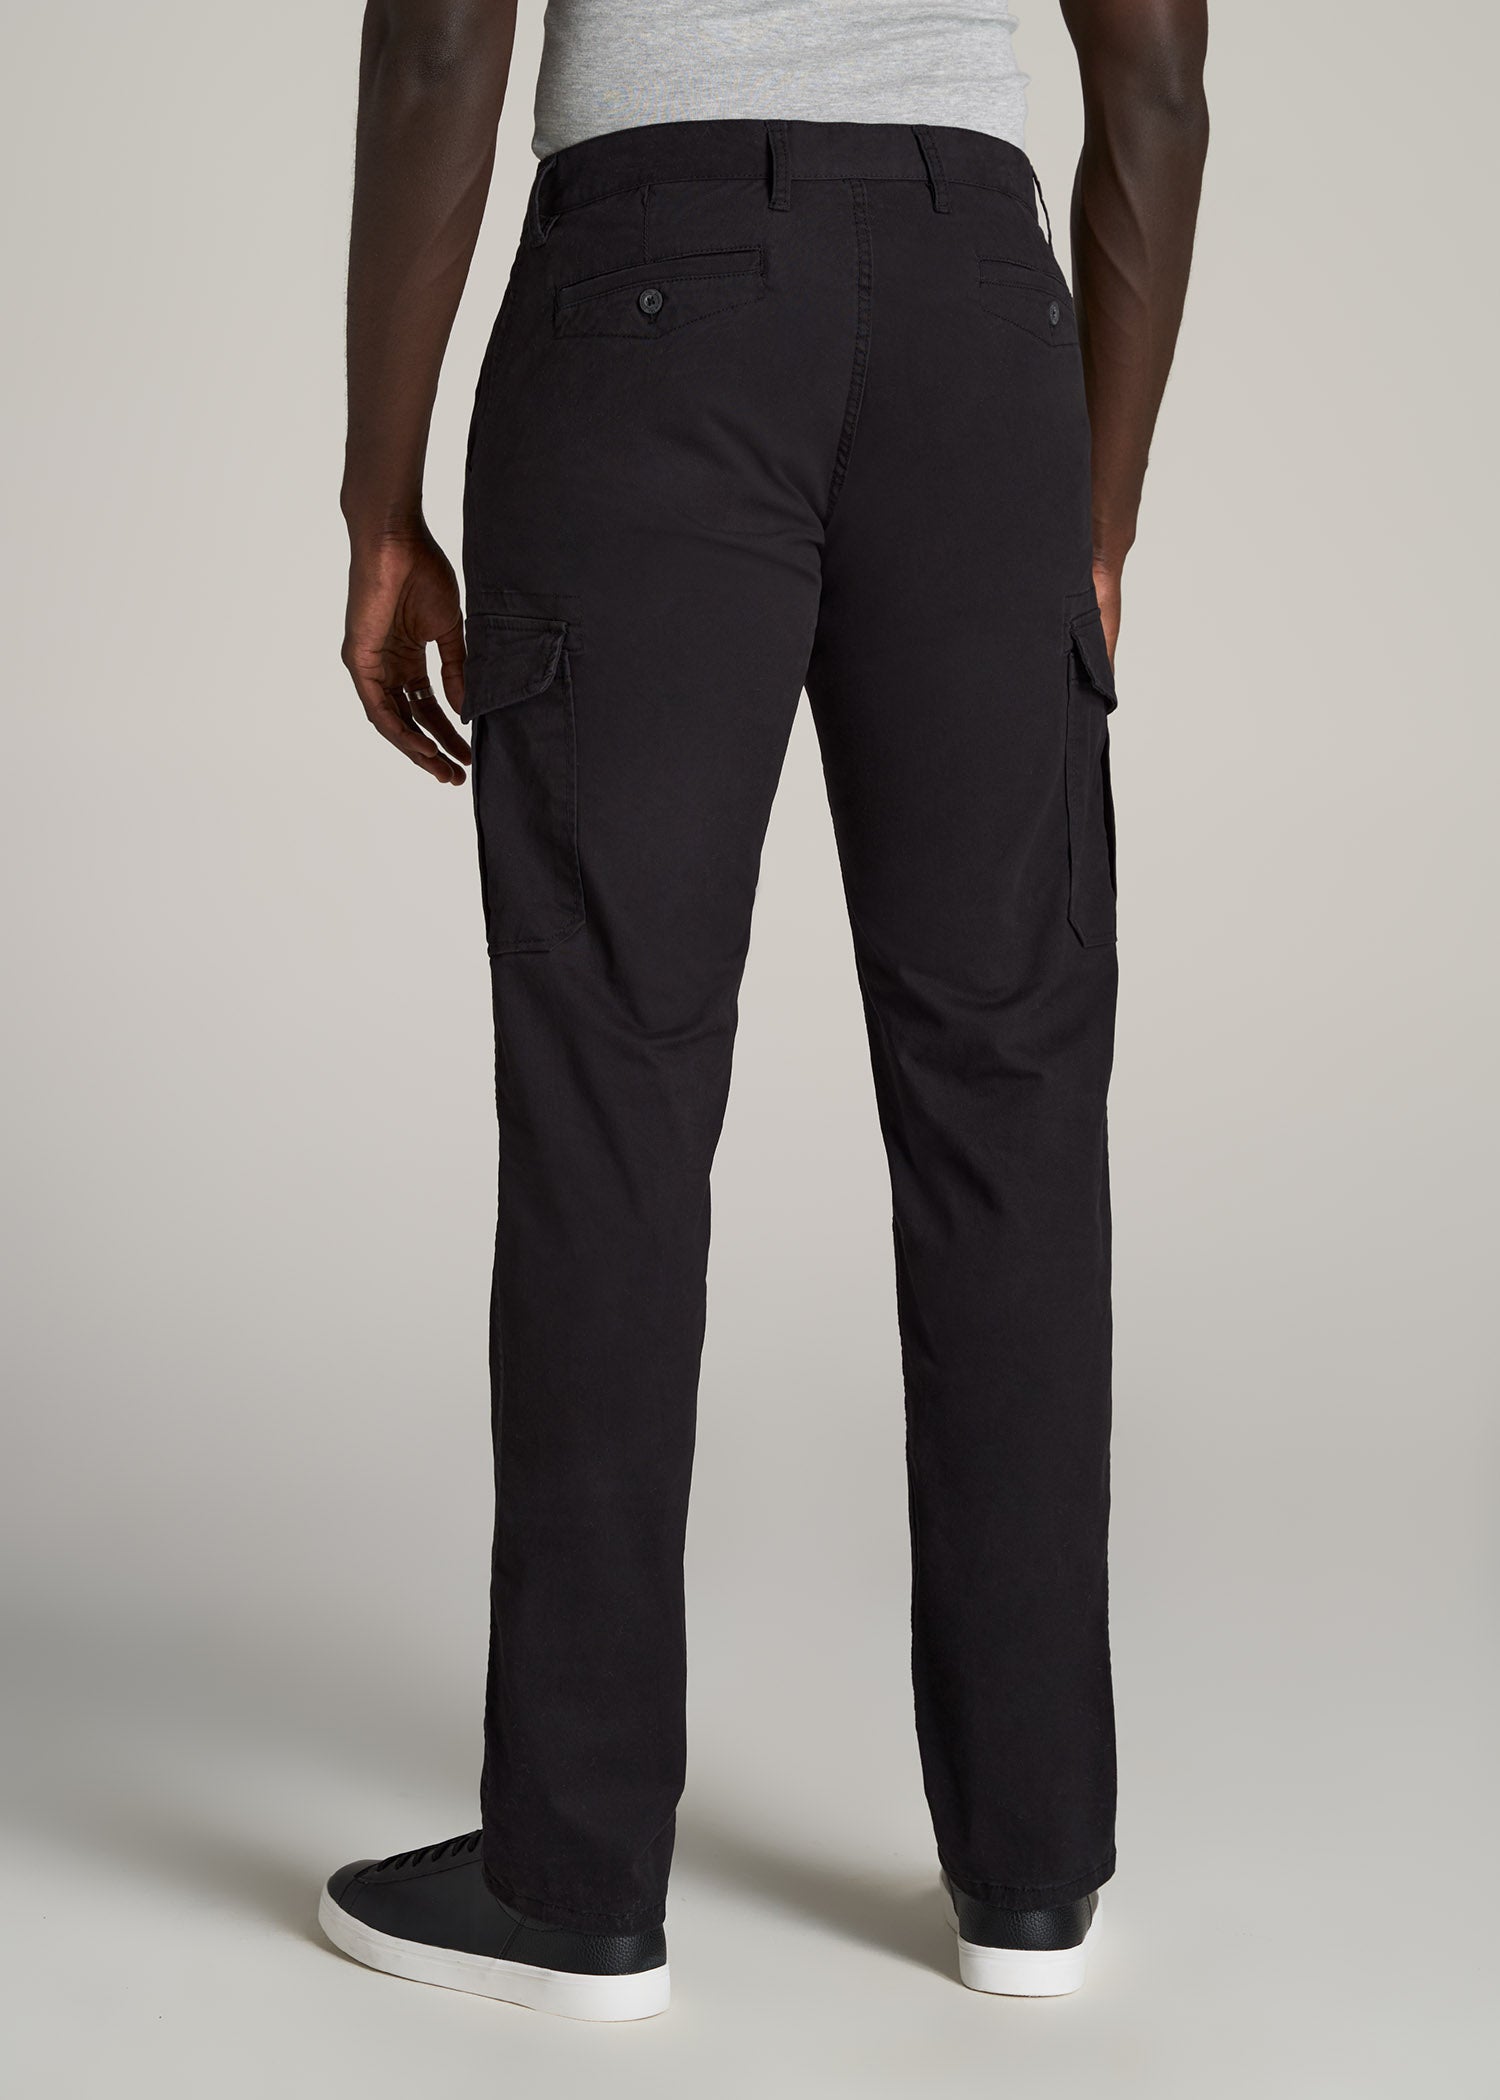 Men's Extreme Motion Twill Cargo Pant (Big & Tall) in Charcoal